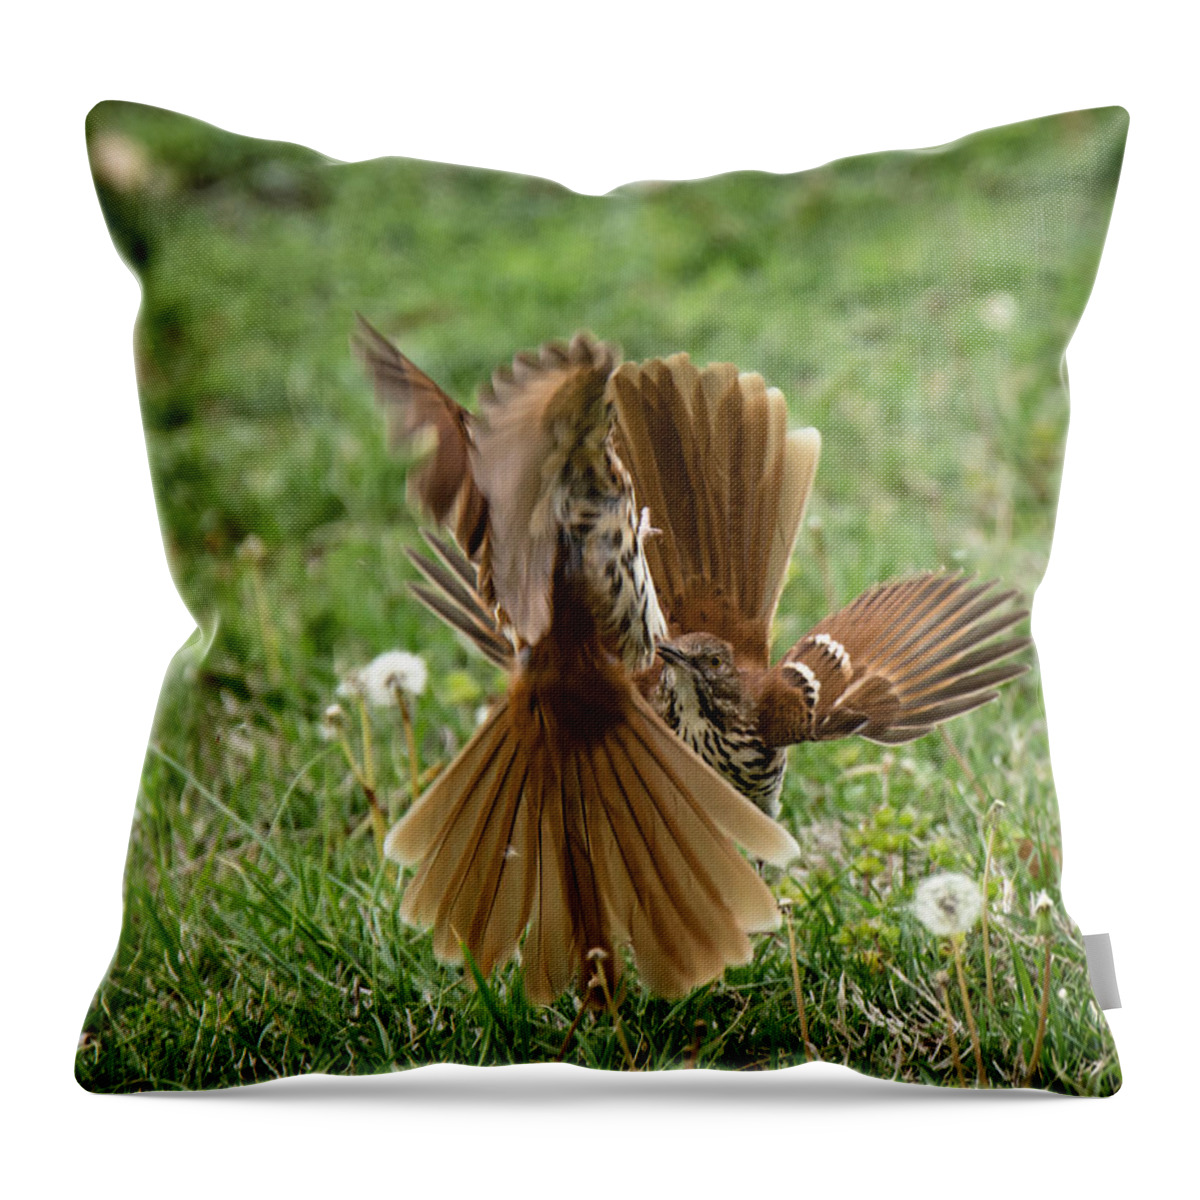 Dance Throw Pillow featuring the photograph The Dandelion Dance by Steve Marler